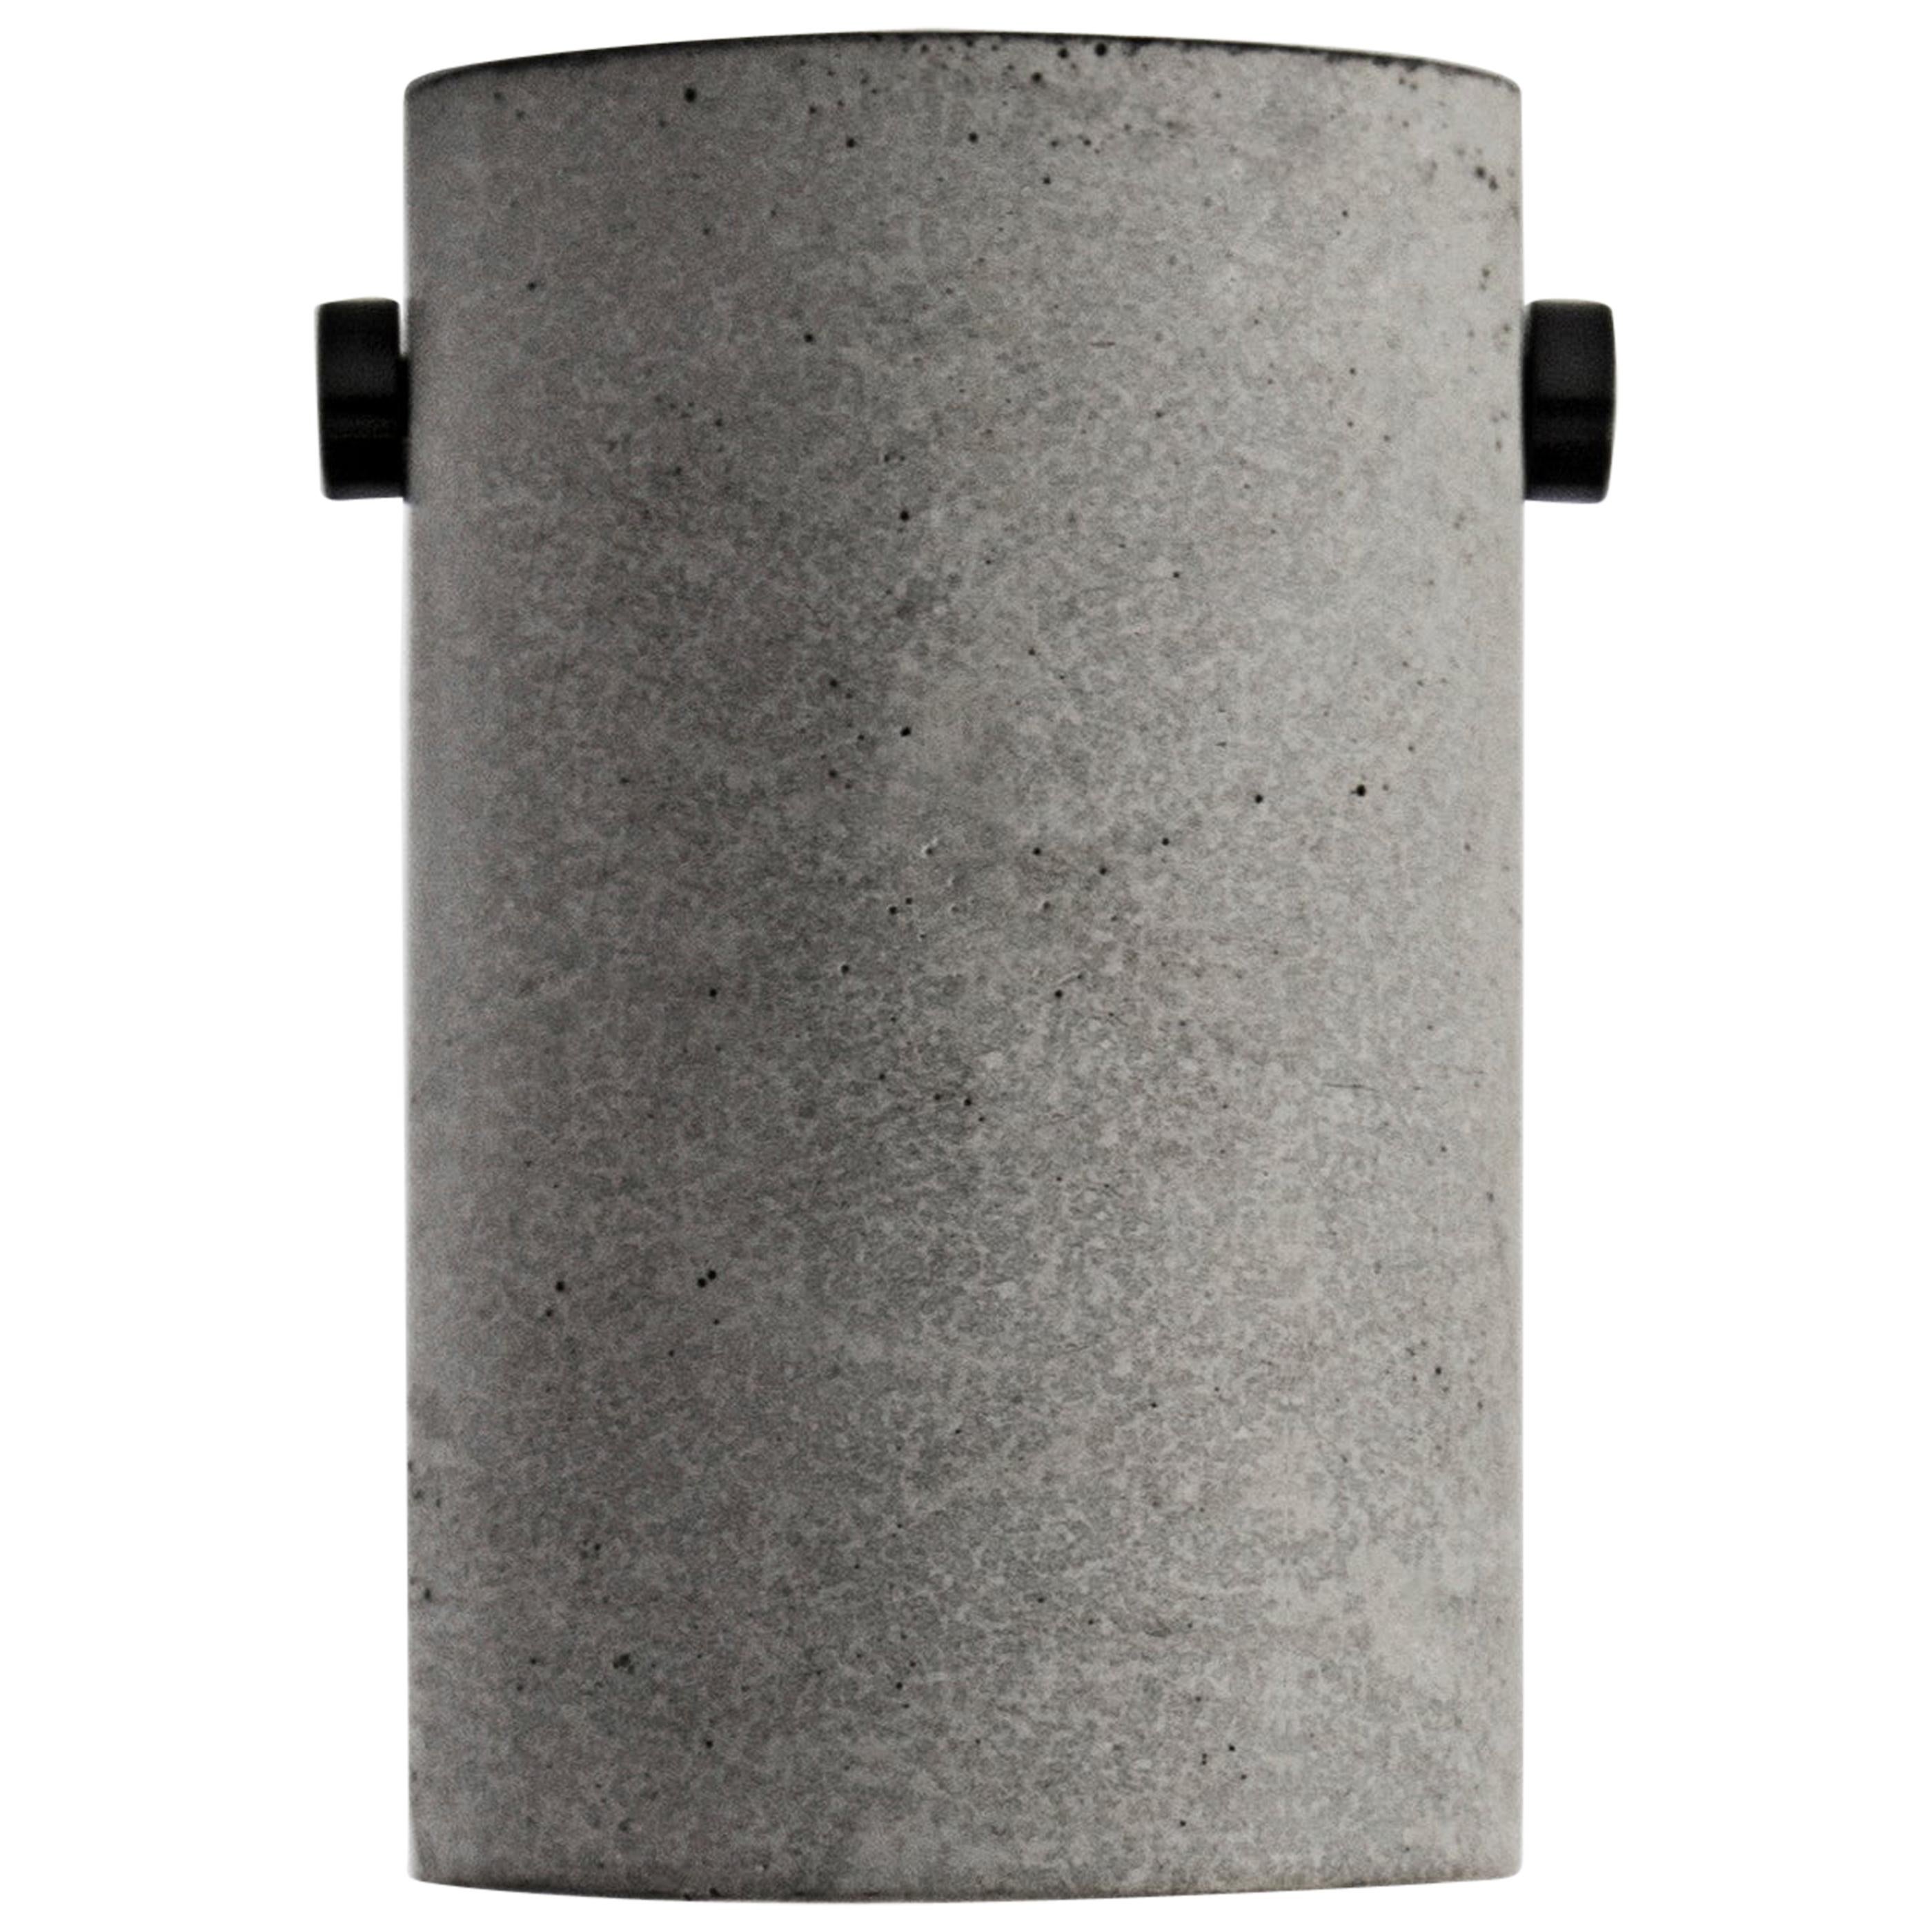 Concrete and Aluminum Ceiling Lamp, “Lv, ” from Concrete Collection by Bentu